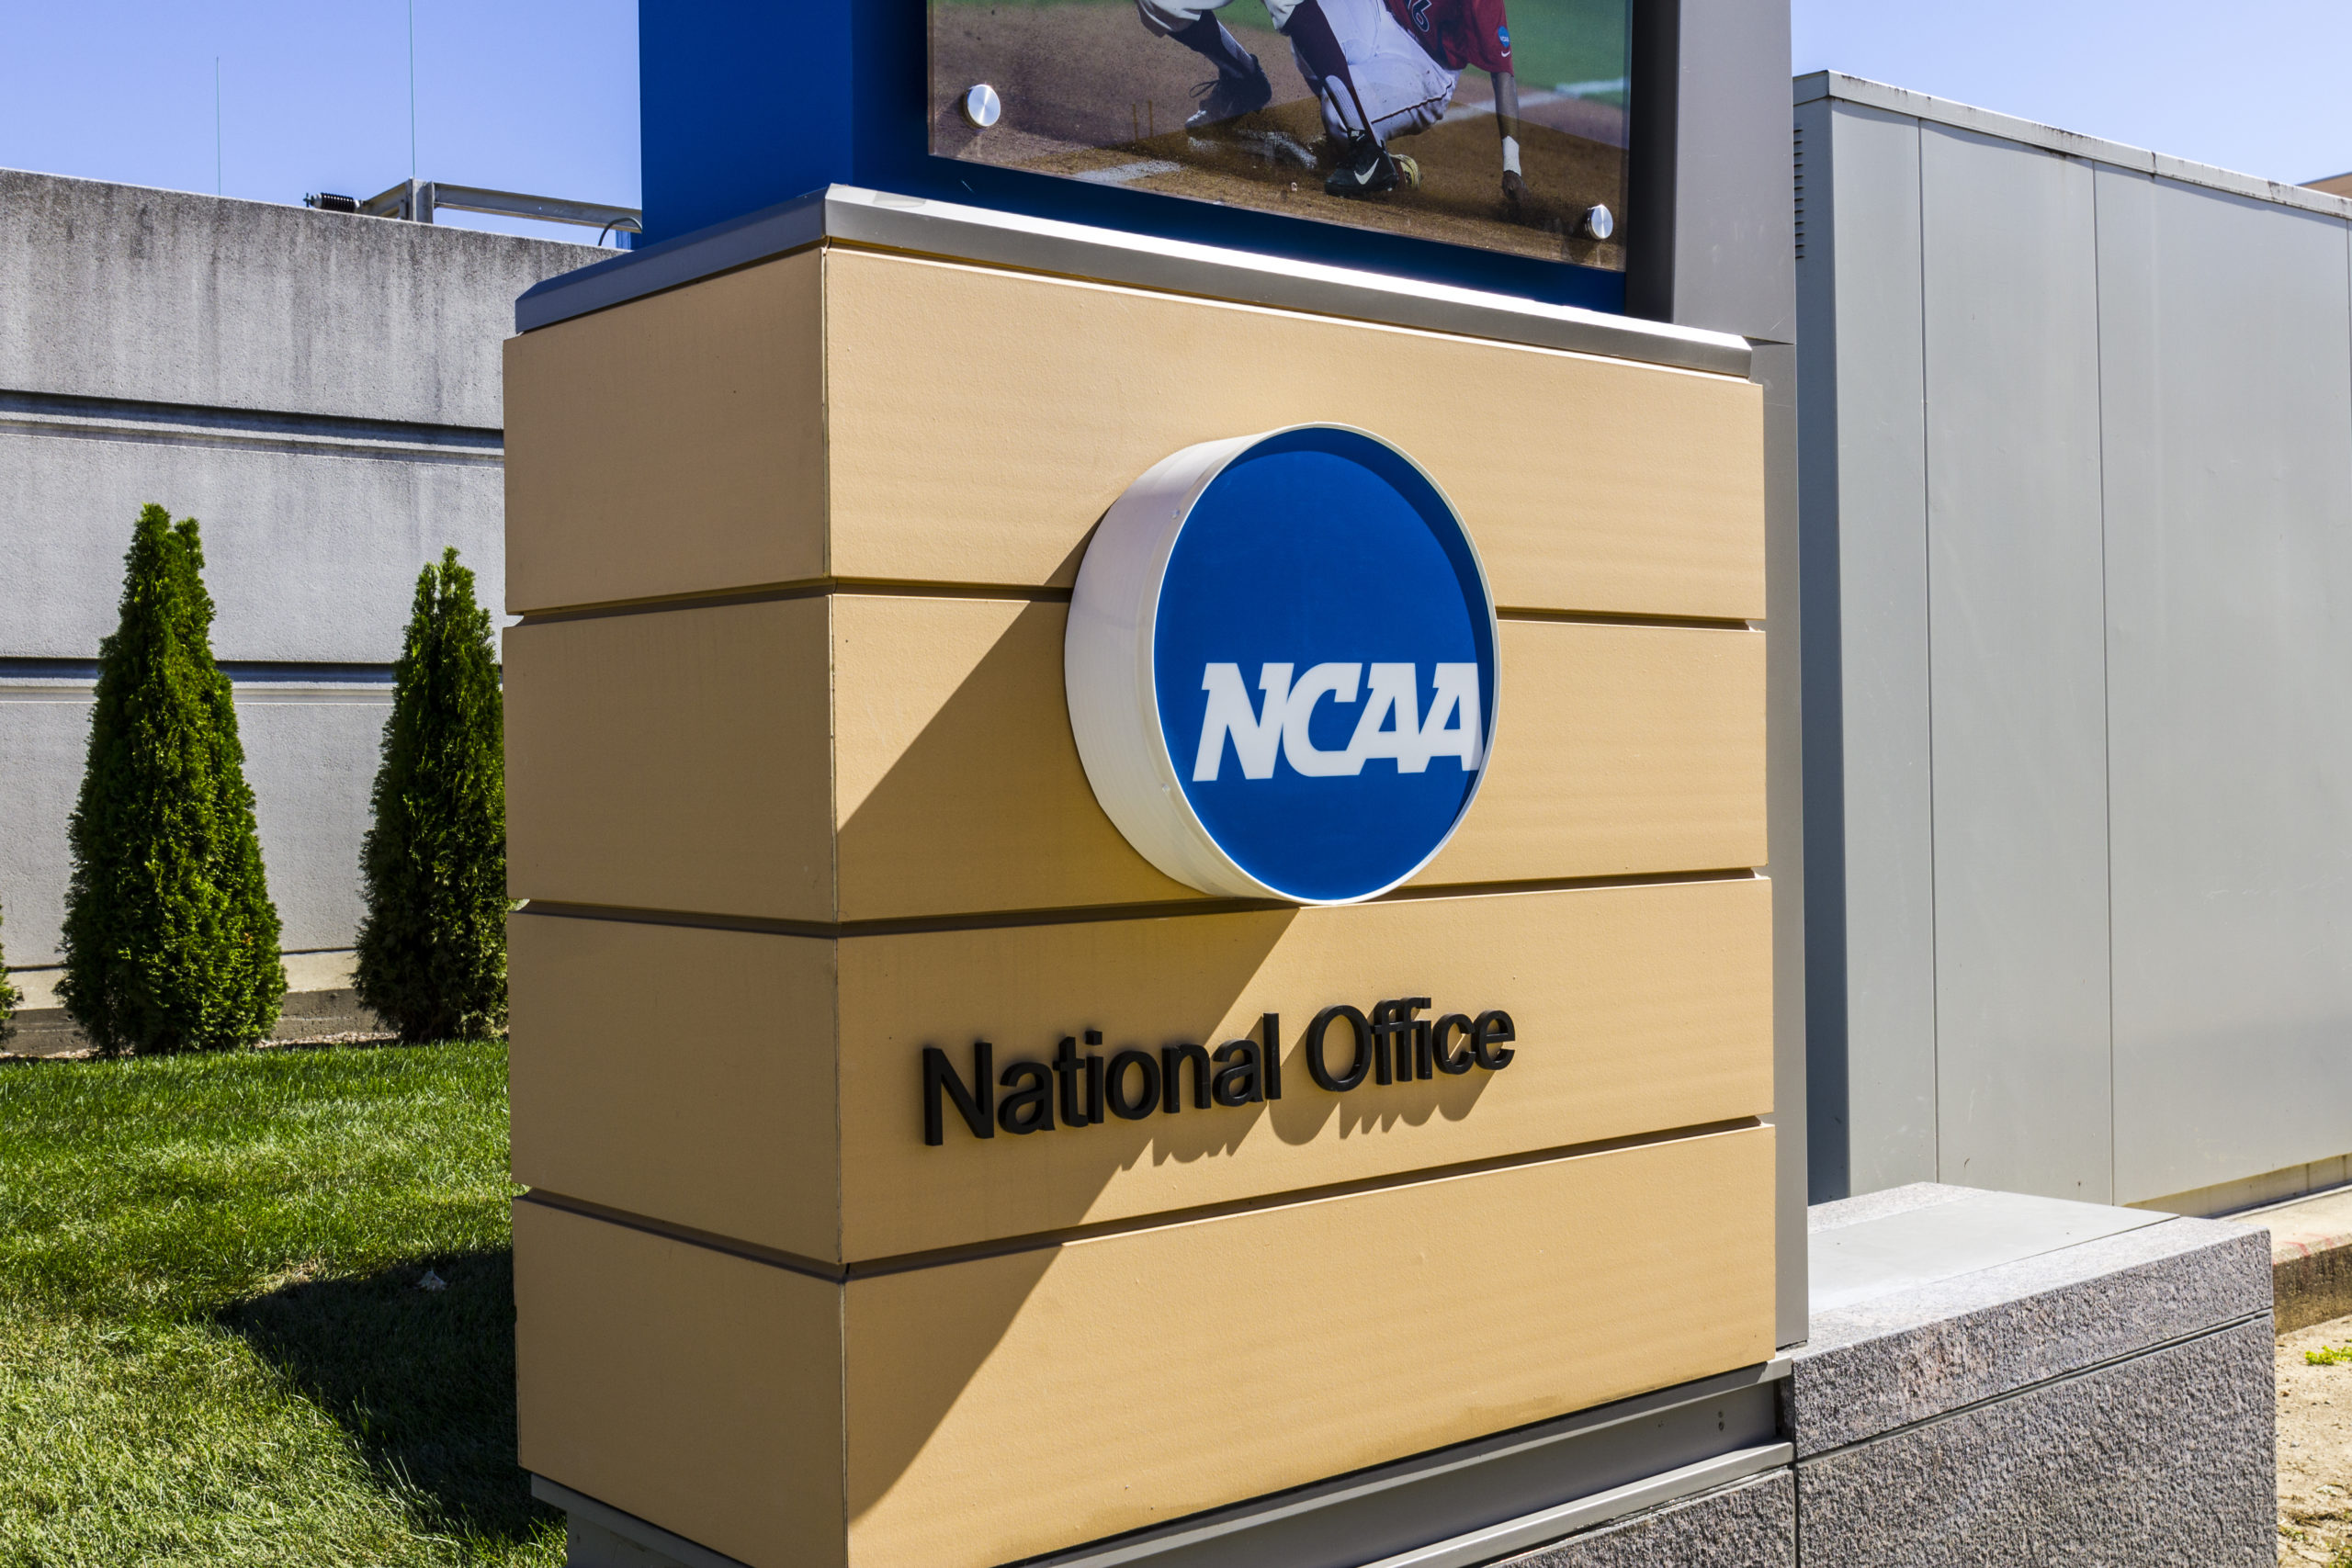 NCAA National office complex sign complex with blue NCAA logo on it.